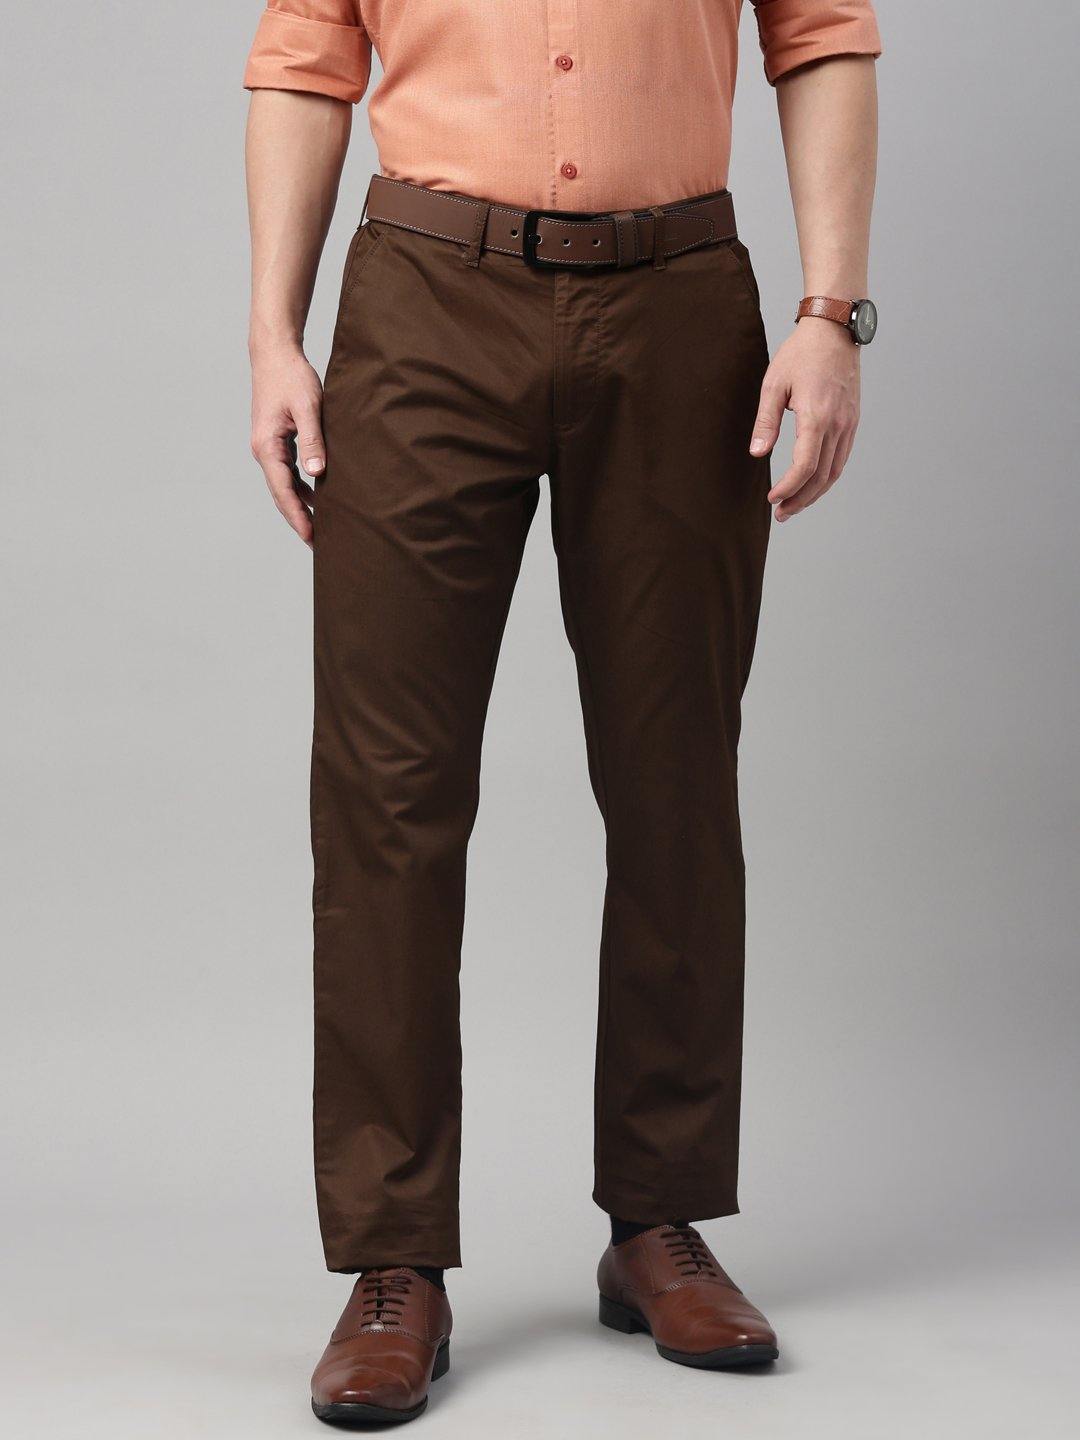 Buy Stylish Light Brown Pants For Men  Ecentric